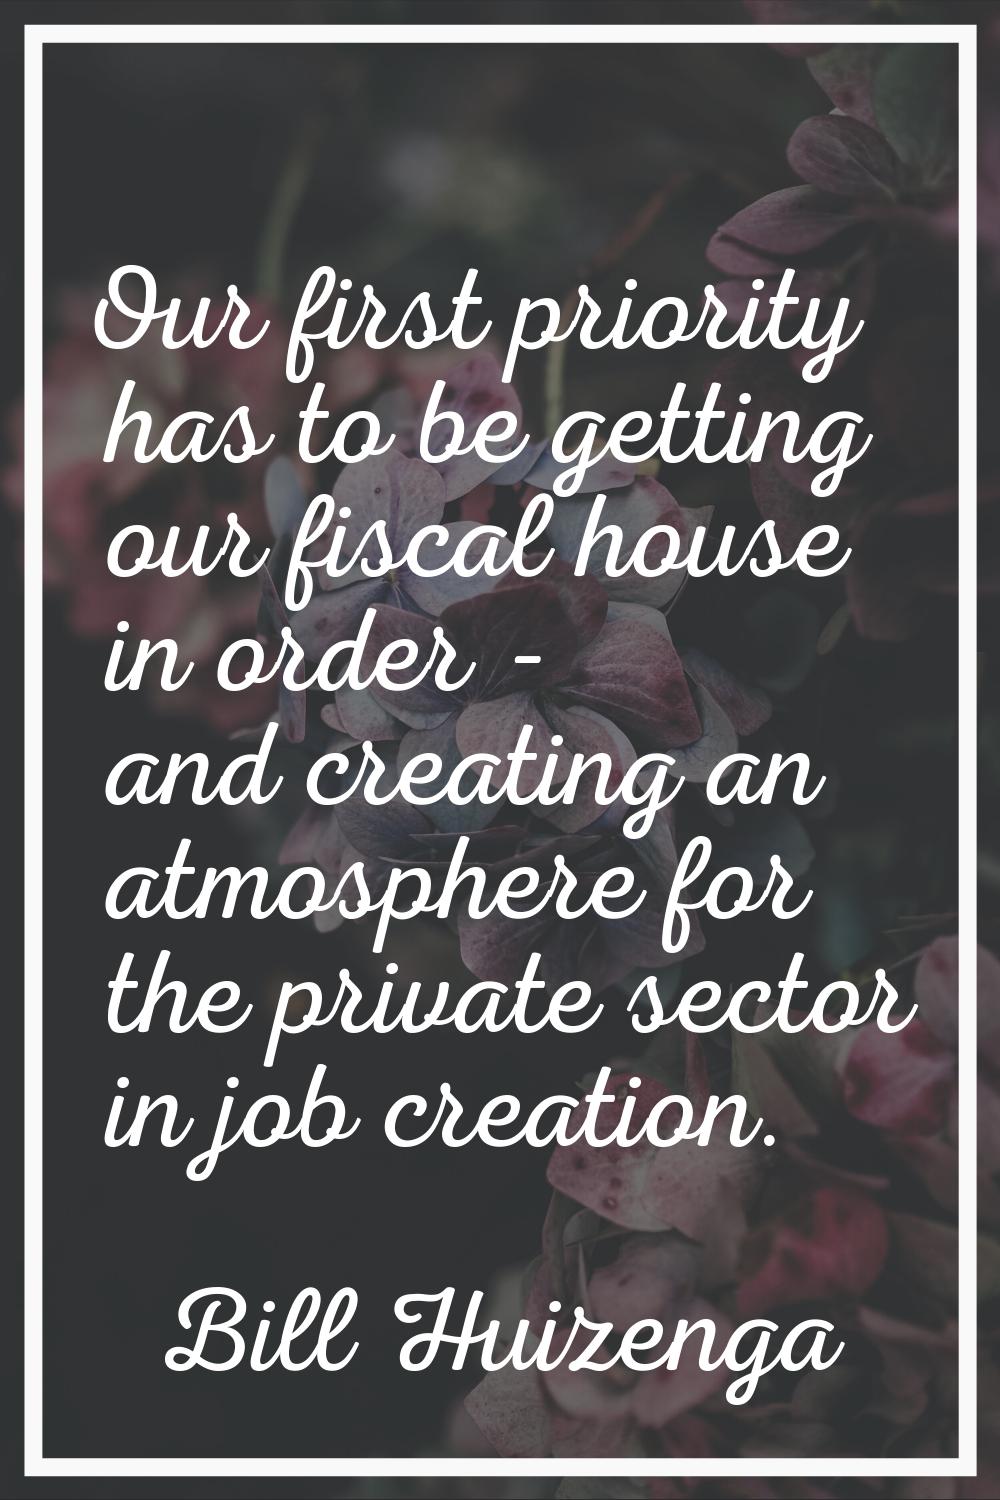 Our first priority has to be getting our fiscal house in order - and creating an atmosphere for the